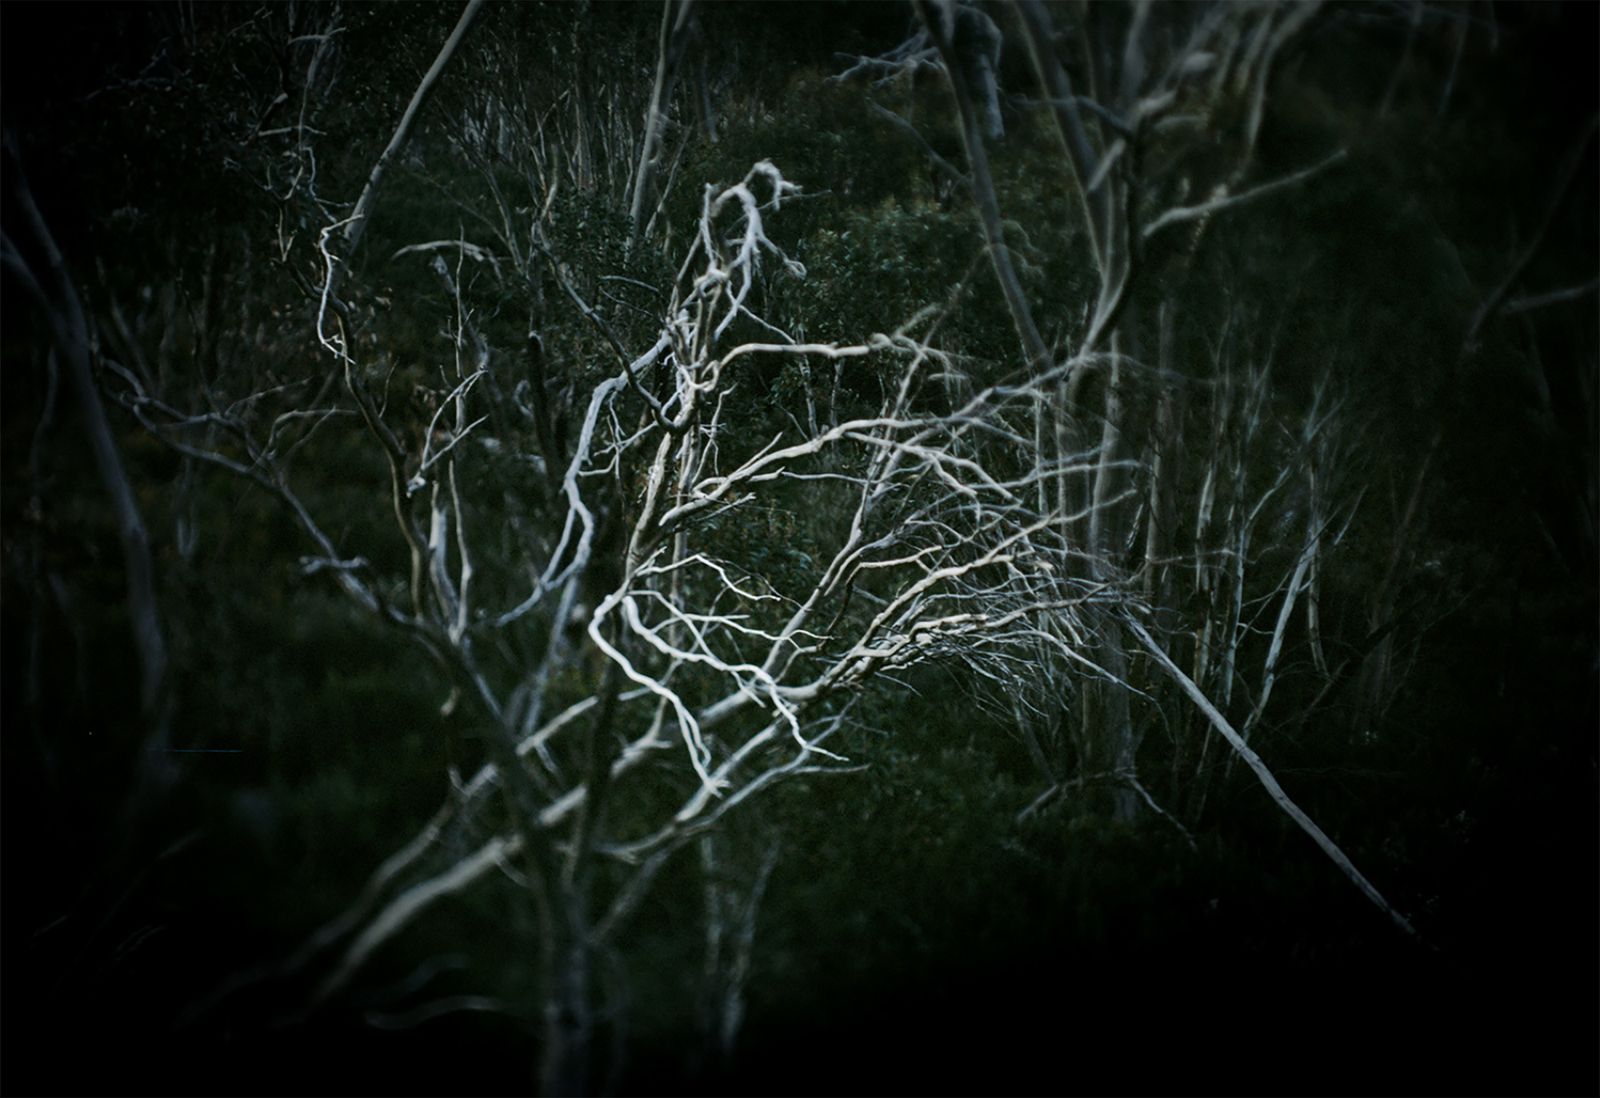 © Aletheia Casey - Image from the The Dark Forgetting photography project